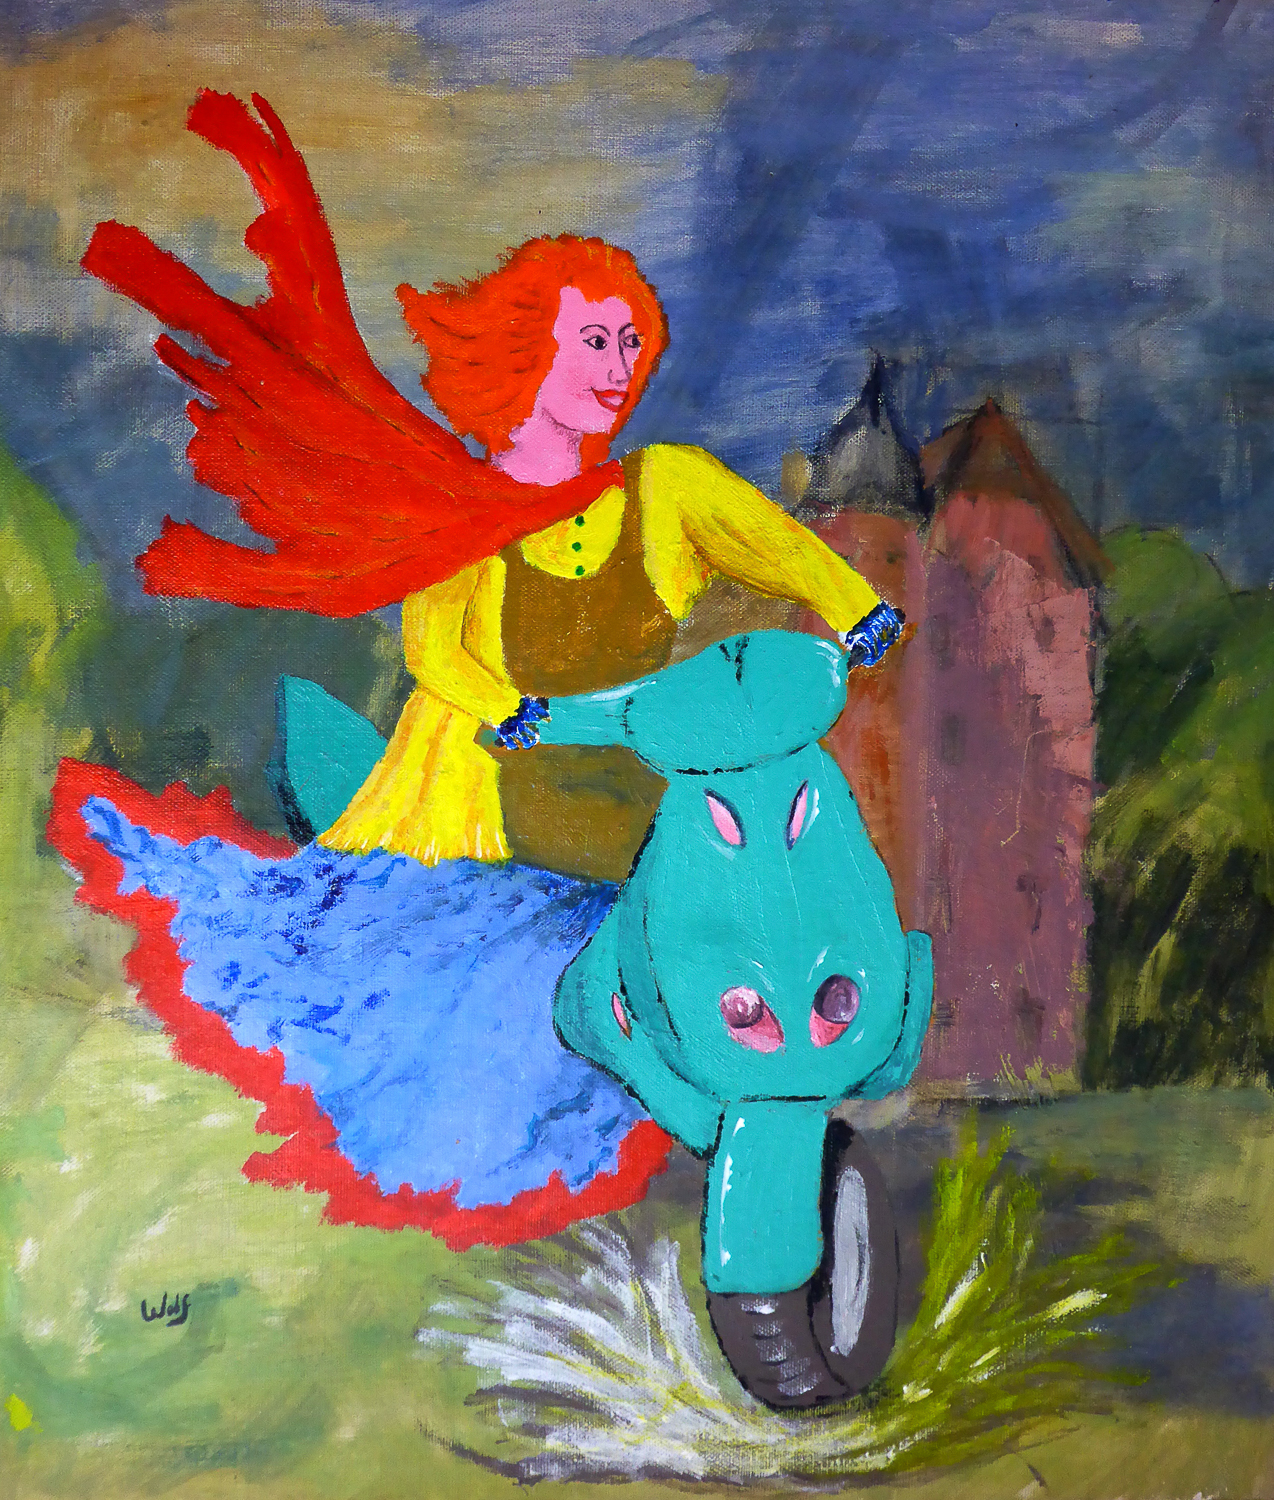 Painting of woman on a motor bike looking happy